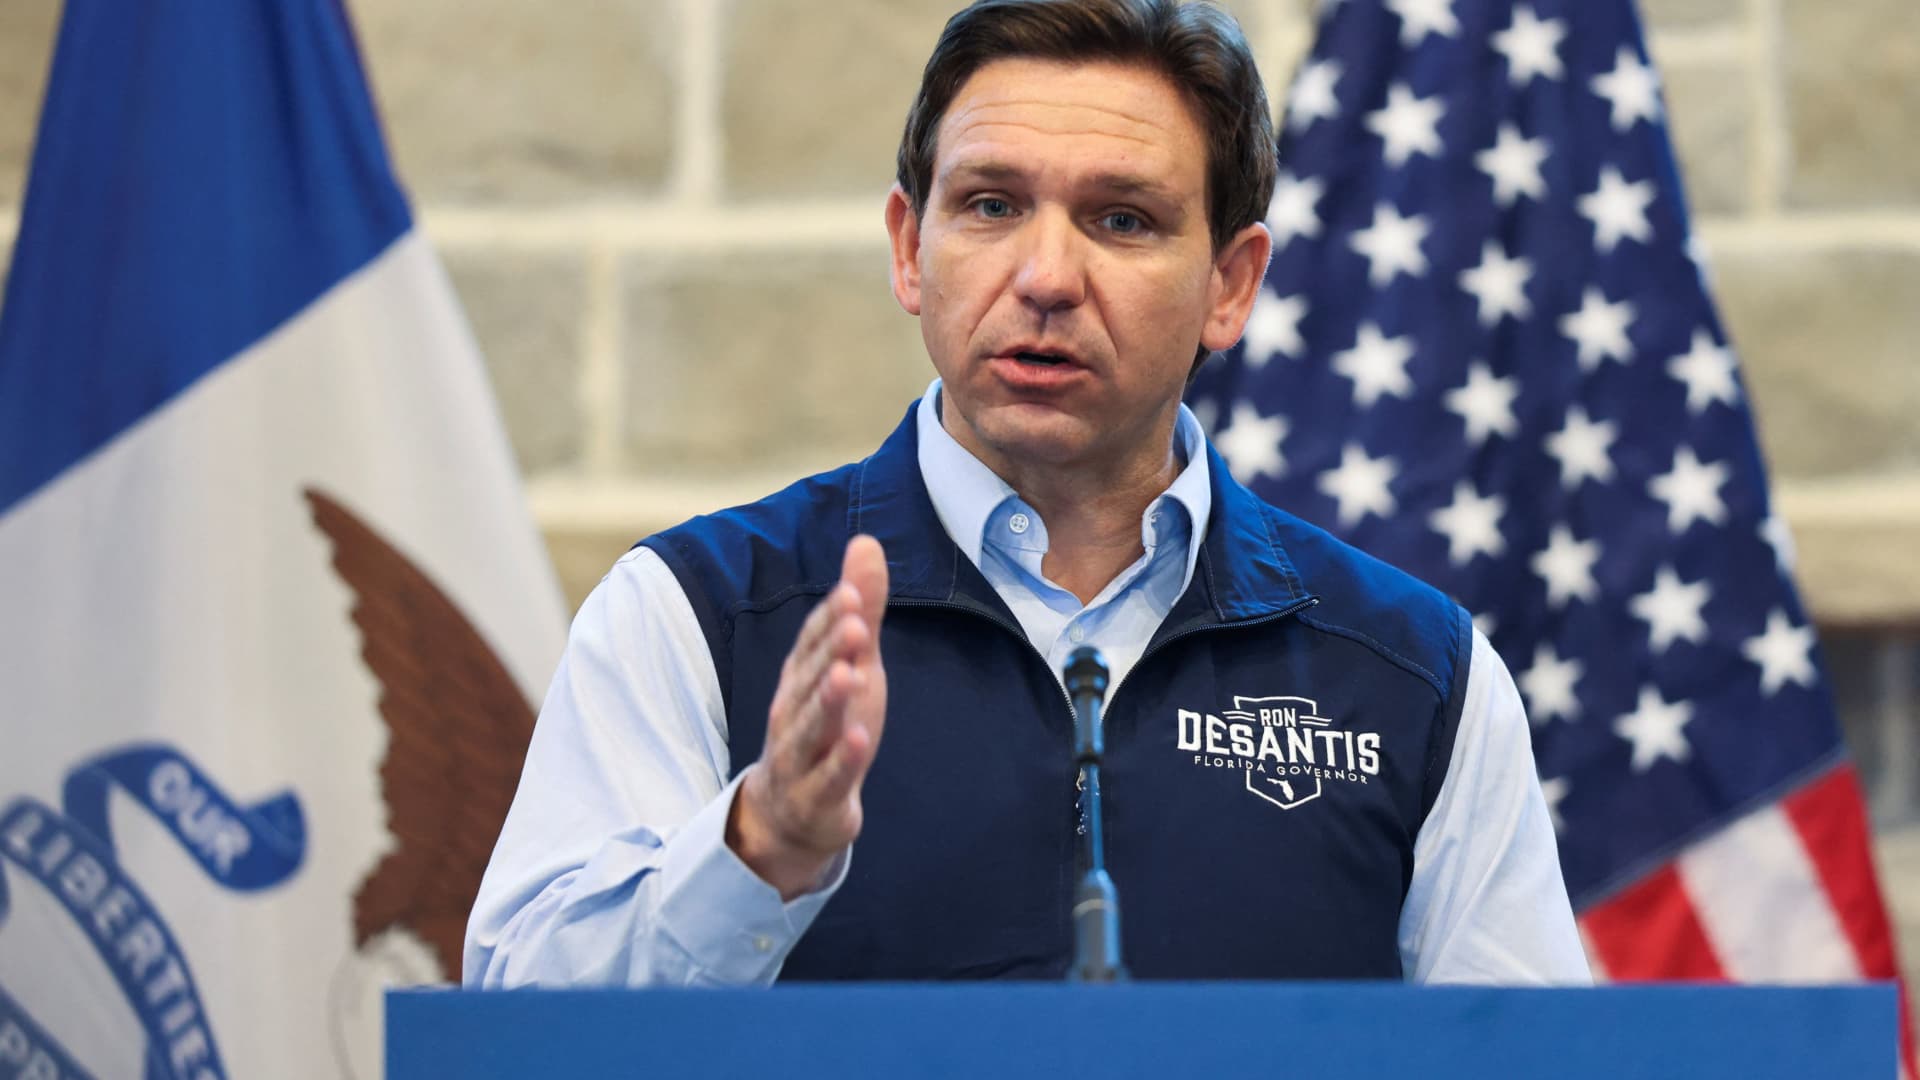 Florida Governor Ron Desantis addresses Iowa residents on his second day of campaigning as an official candidate for the 2024 U.S. Republican presidential nomination, at Sun Valley Barn in Pella, Iowa, U.S. May 31, 2023. 